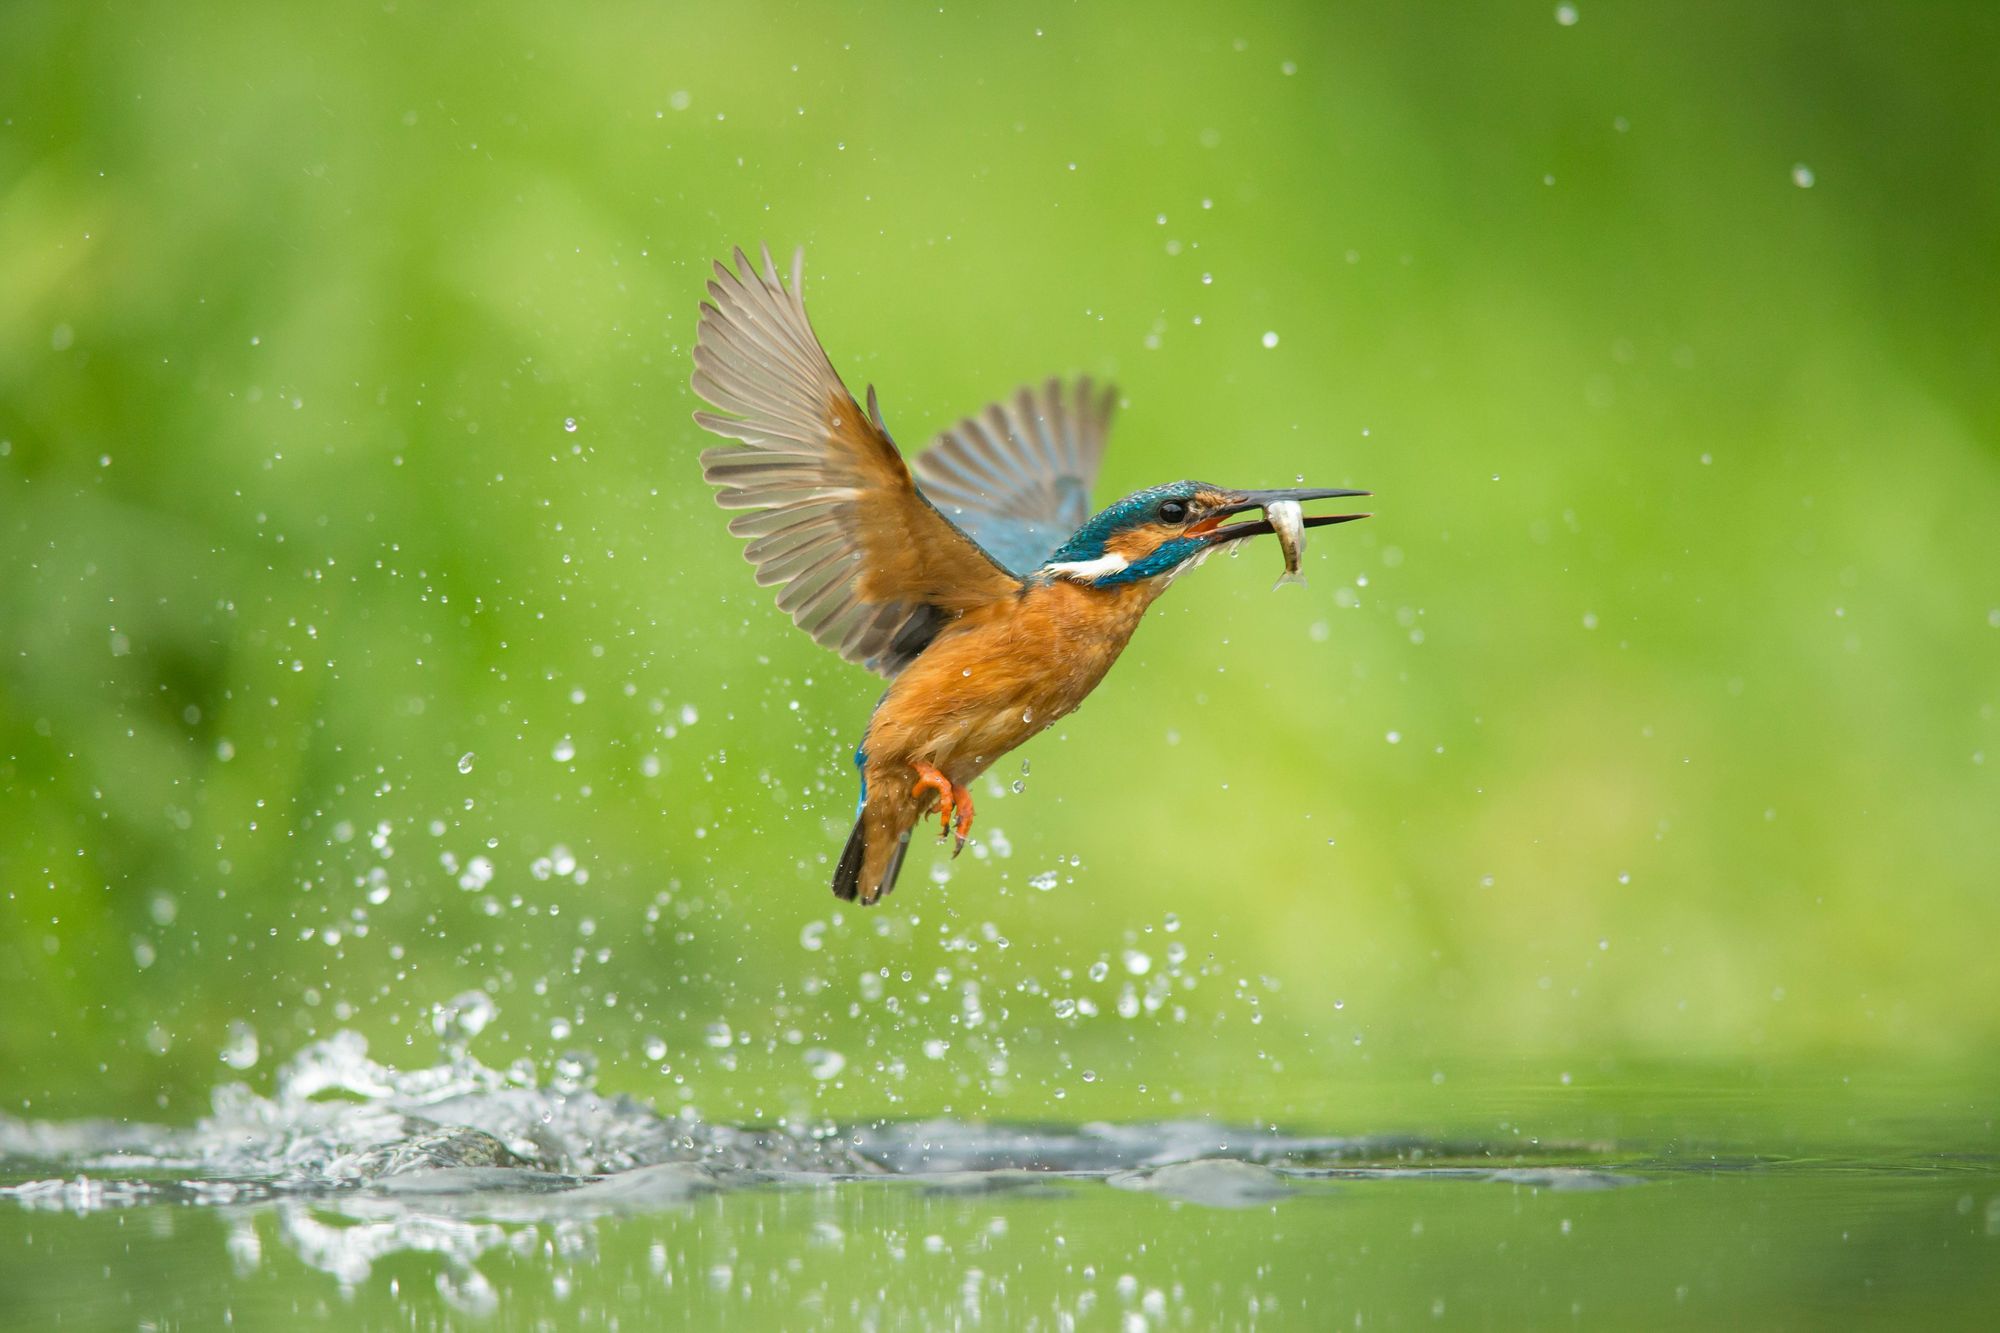 A kingfisher emerges from a successful dive. The birds are found around Britain. Photo: Getty